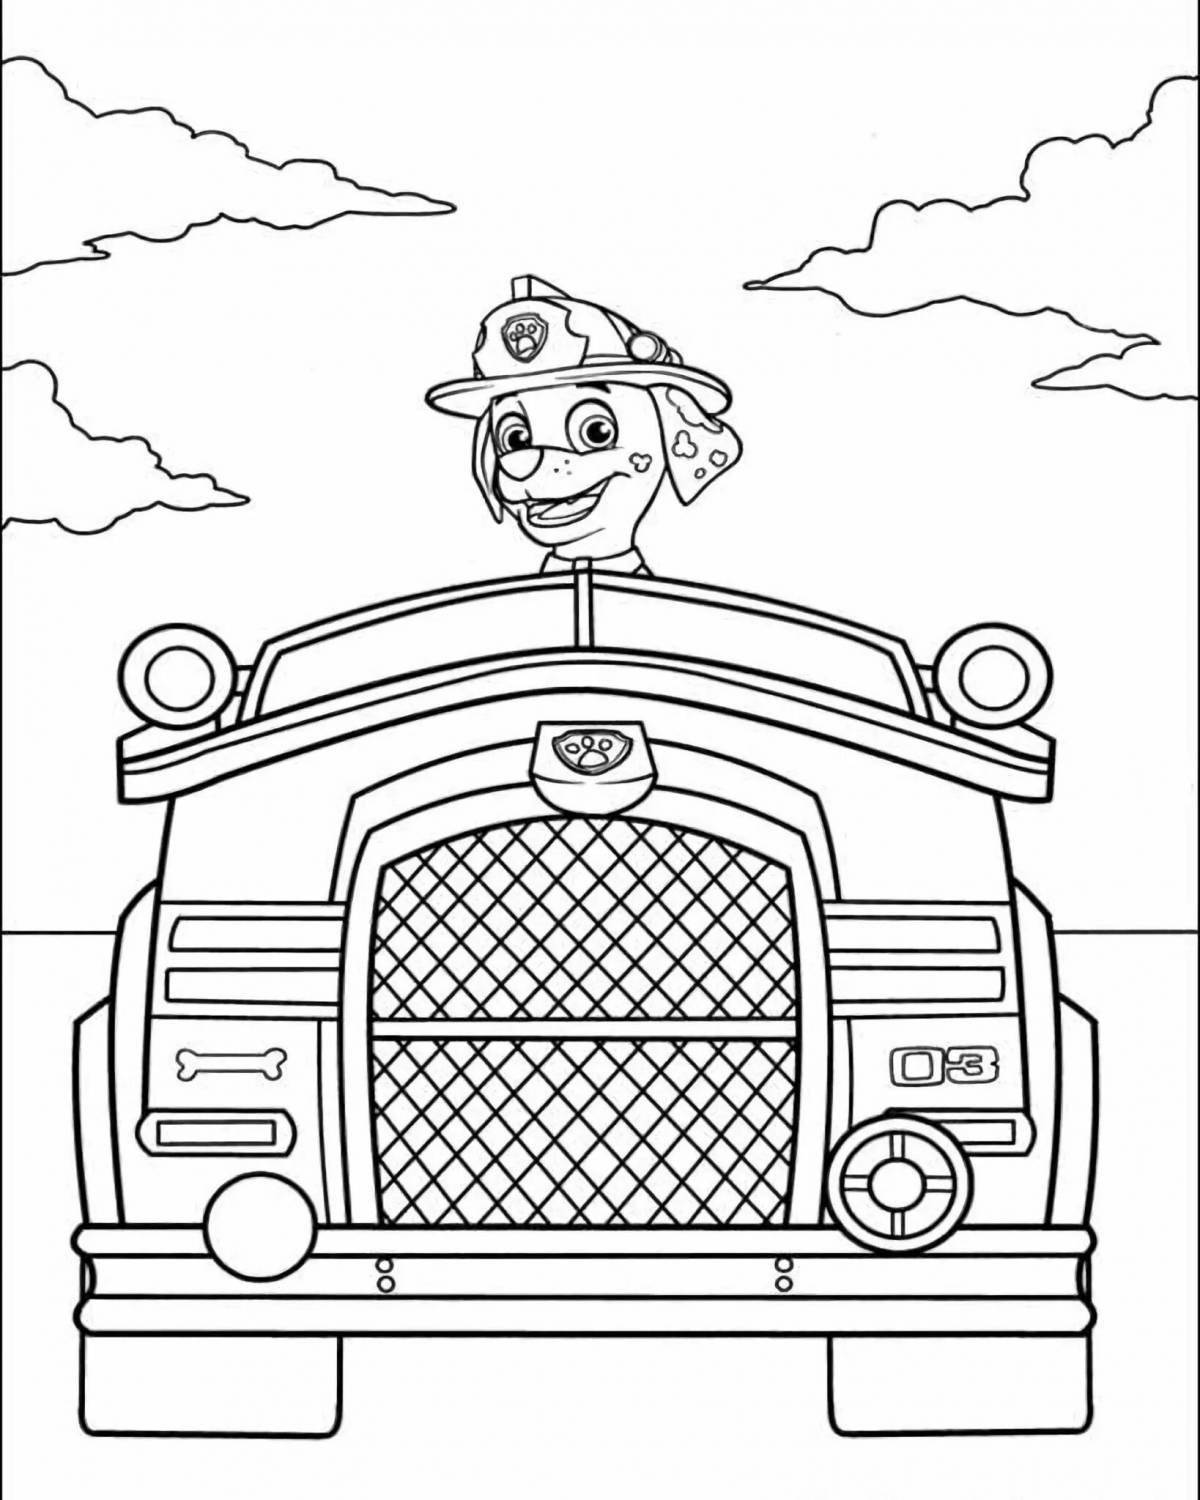 Finly fire truck coloring page